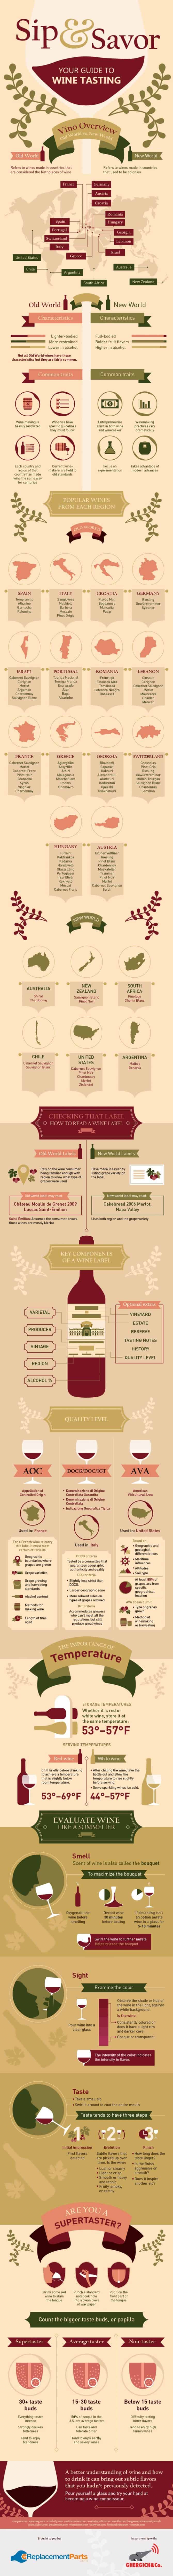 Complete guide to wine tasting infographic